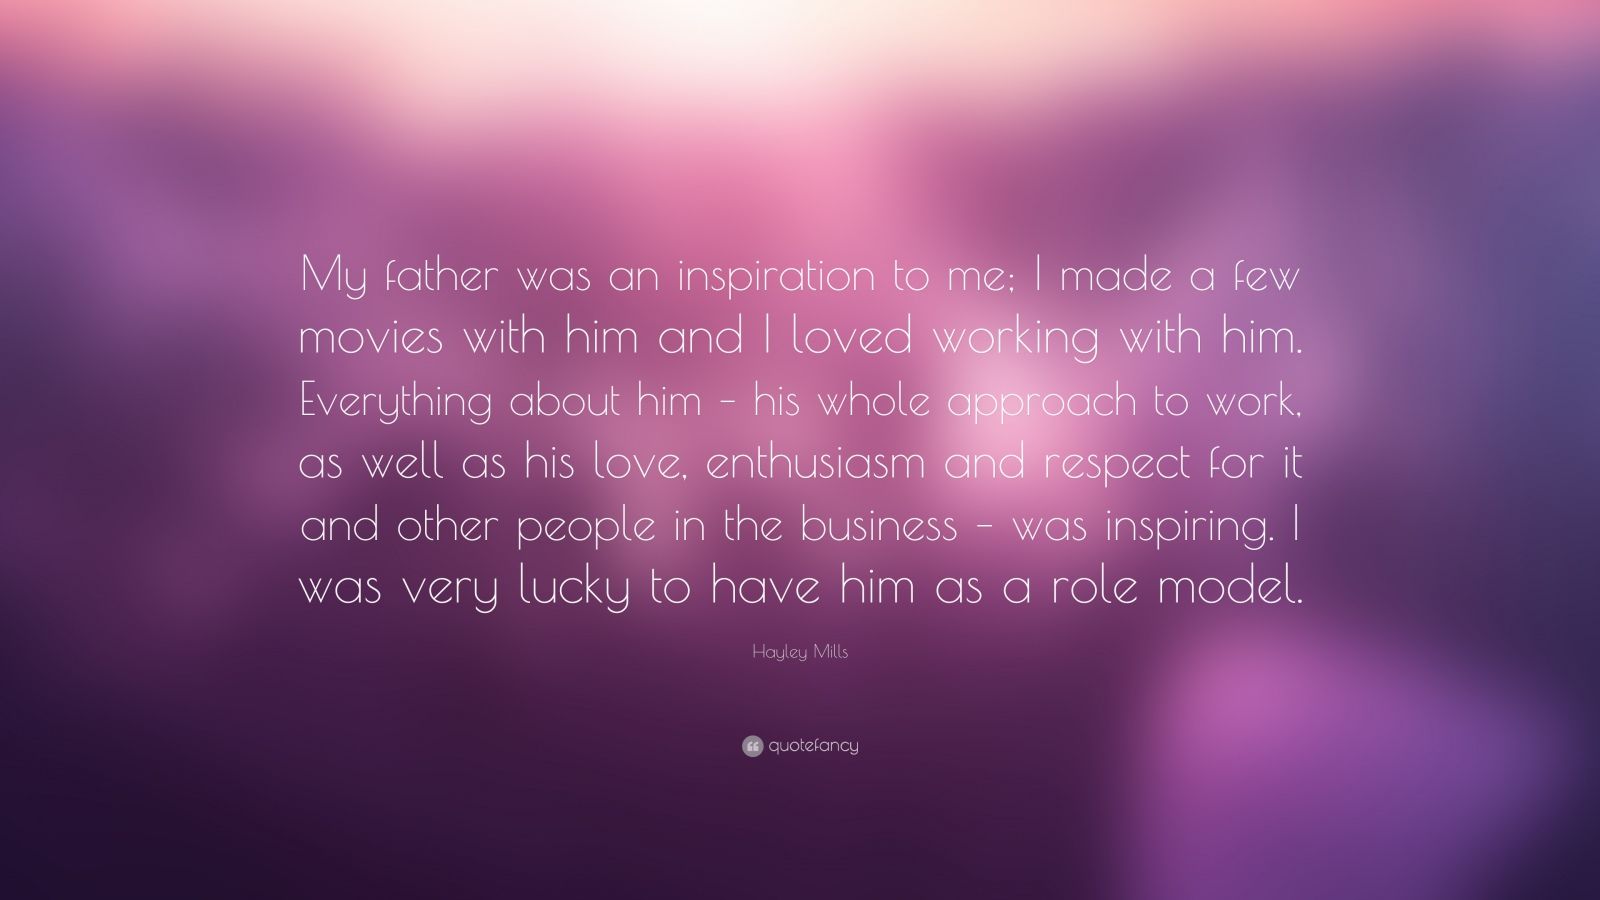 Hayley Mills Quote: “My father was an inspiration to me; I made a few ...